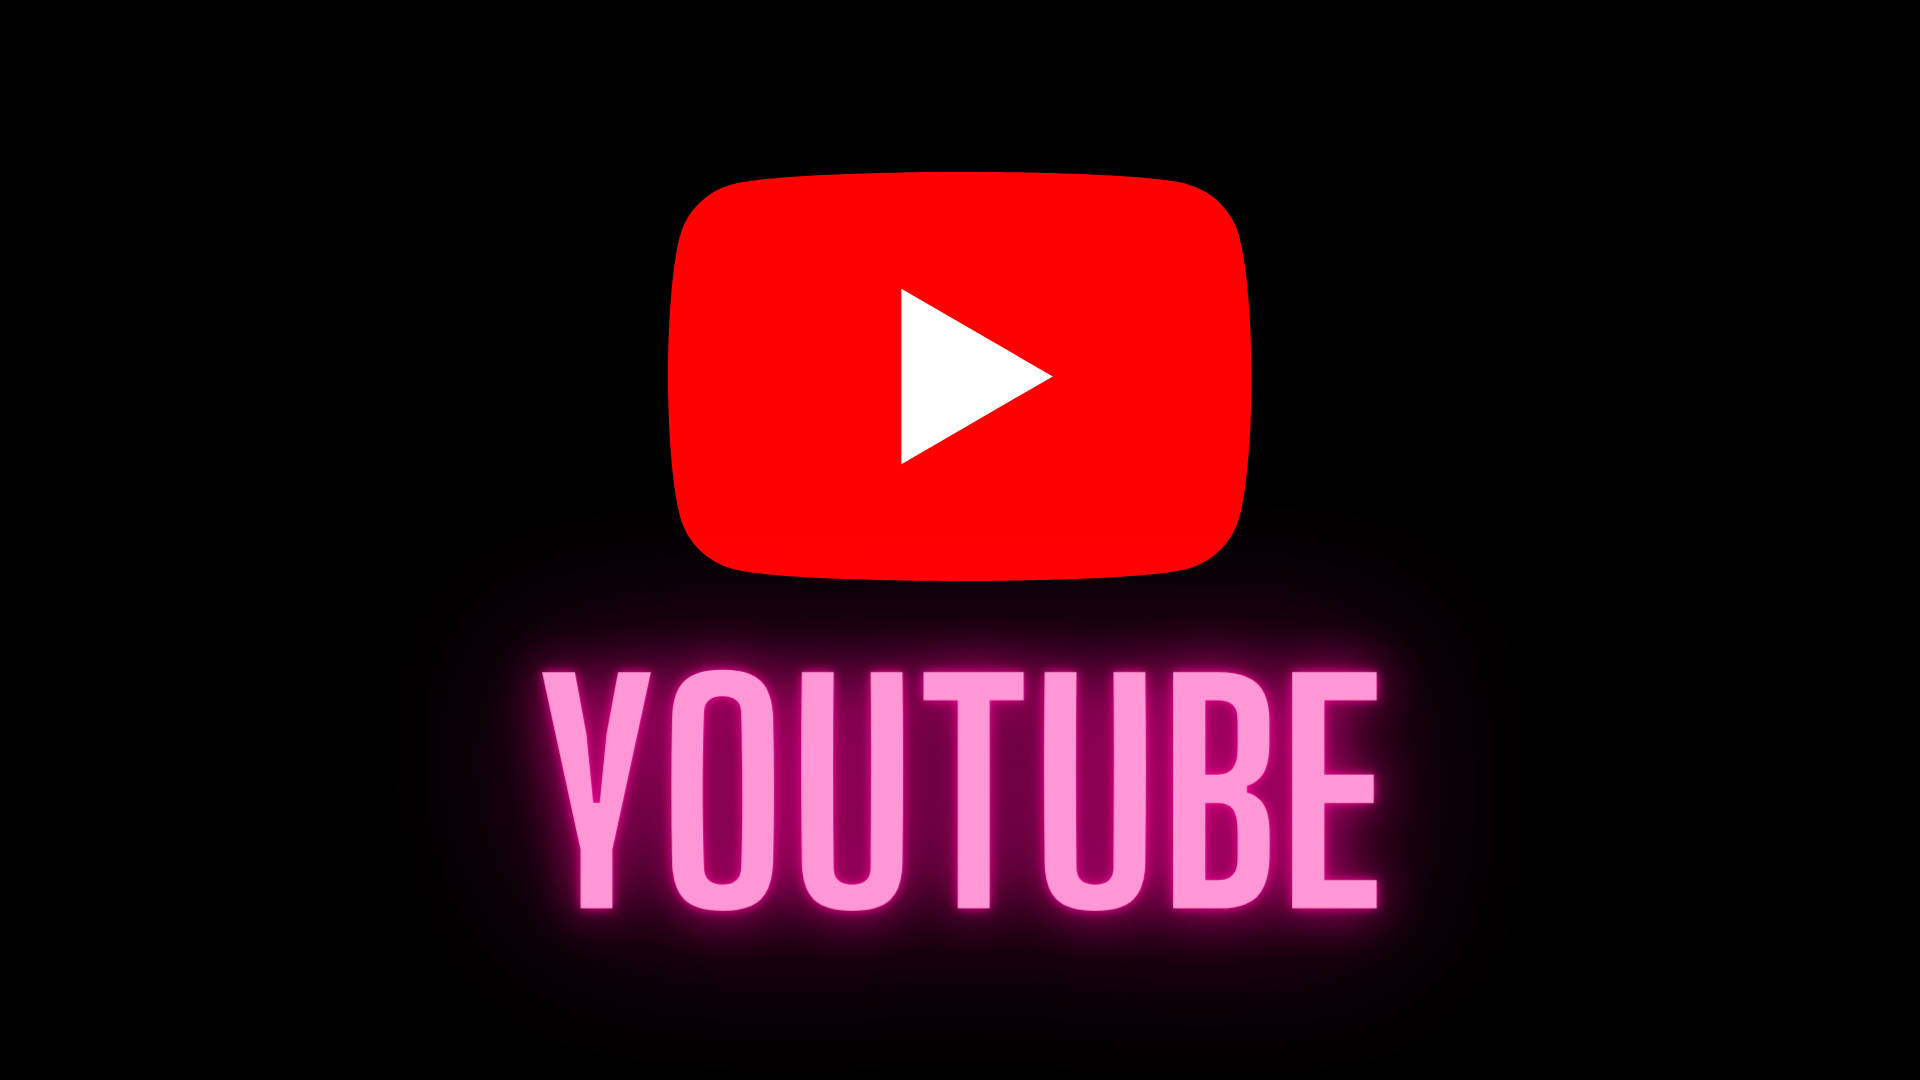 Youtube Logo And Name In Neon Background